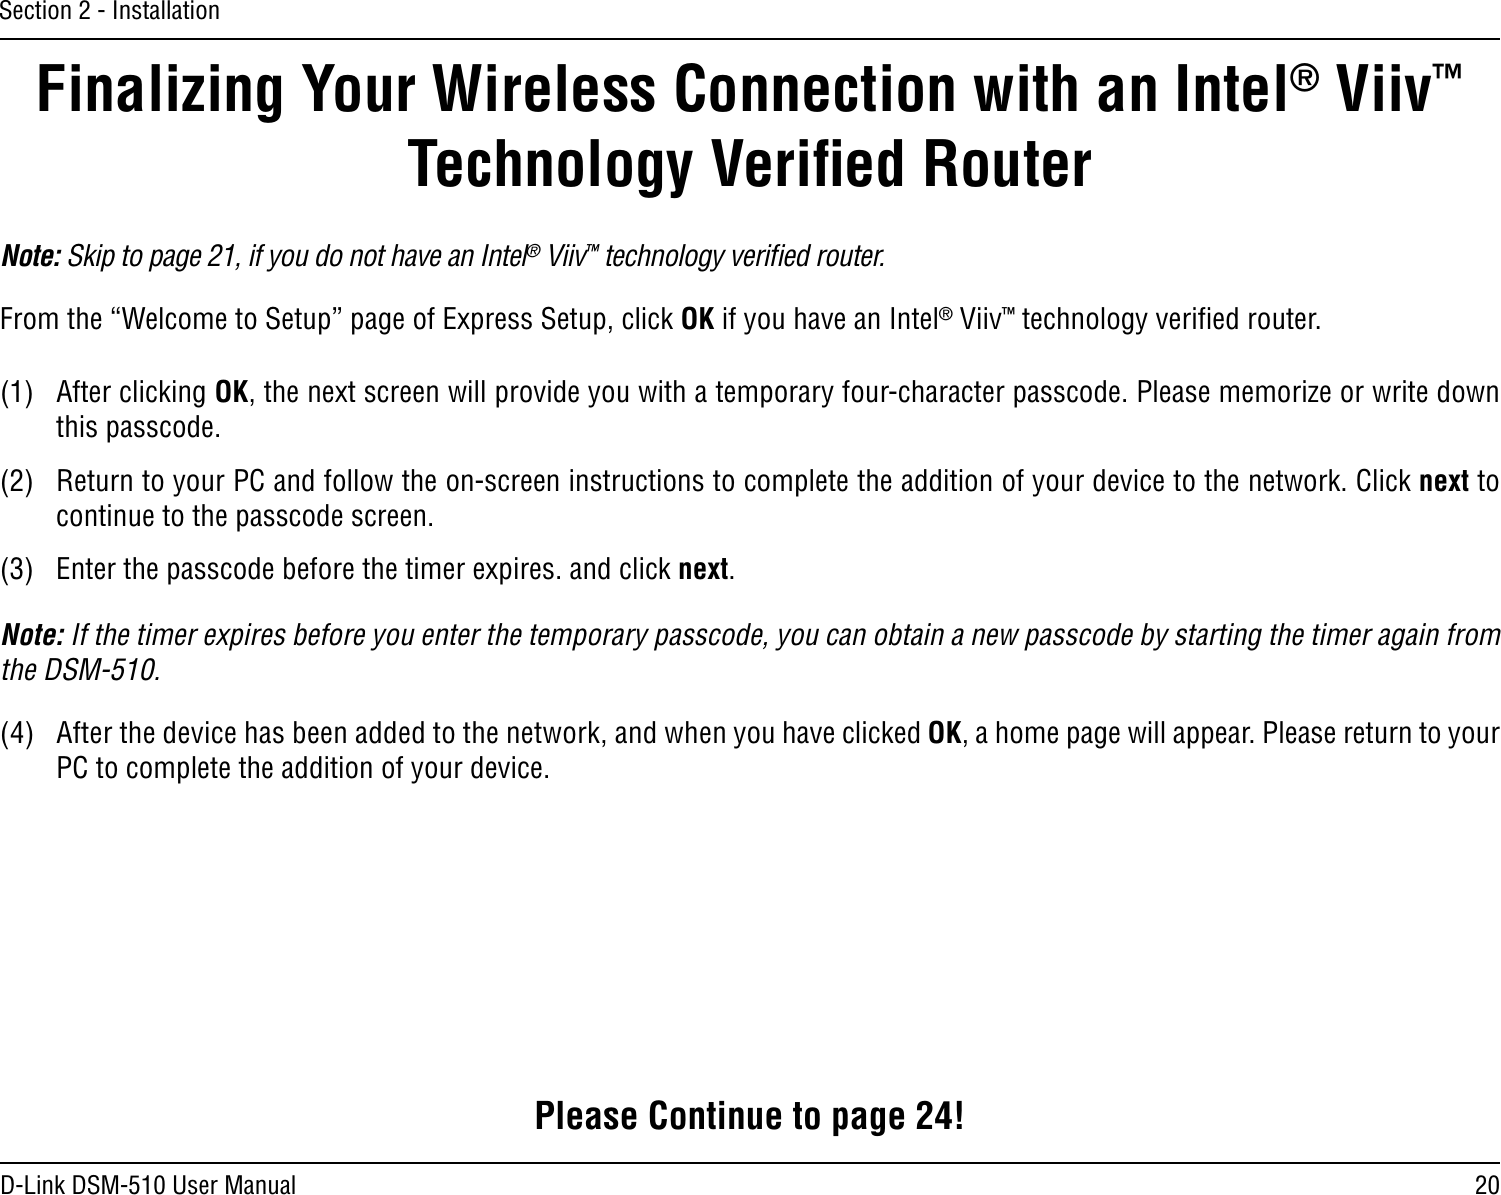 20D-Link DSM-510 User ManualSection 2 - InstallationFinalizing Your Wireless Connection with an Intel® Viiv™ Technology Veriﬁed RouterNote: Skip to page 21, if you do not have an Intel® Viiv™ technology veriﬁed router.From the “Welcome to Setup” page of Express Setup, click OK if you have an Intel® Viiv™ technology veriﬁed router.(1)  After clicking OK, the next screen will provide you with a temporary four-character passcode. Please memorize or write down this passcode. (2)  Return to your PC and follow the on-screen instructions to complete the addition of your device to the network. Click next to continue to the passcode screen.(3)  Enter the passcode before the timer expires. and click next. Note: If the timer expires before you enter the temporary passcode, you can obtain a new passcode by starting the timer again from the DSM-510. (4)  After the device has been added to the network, and when you have clicked OK, a home page will appear. Please return to your PC to complete the addition of your device.Please Continue to page 24!